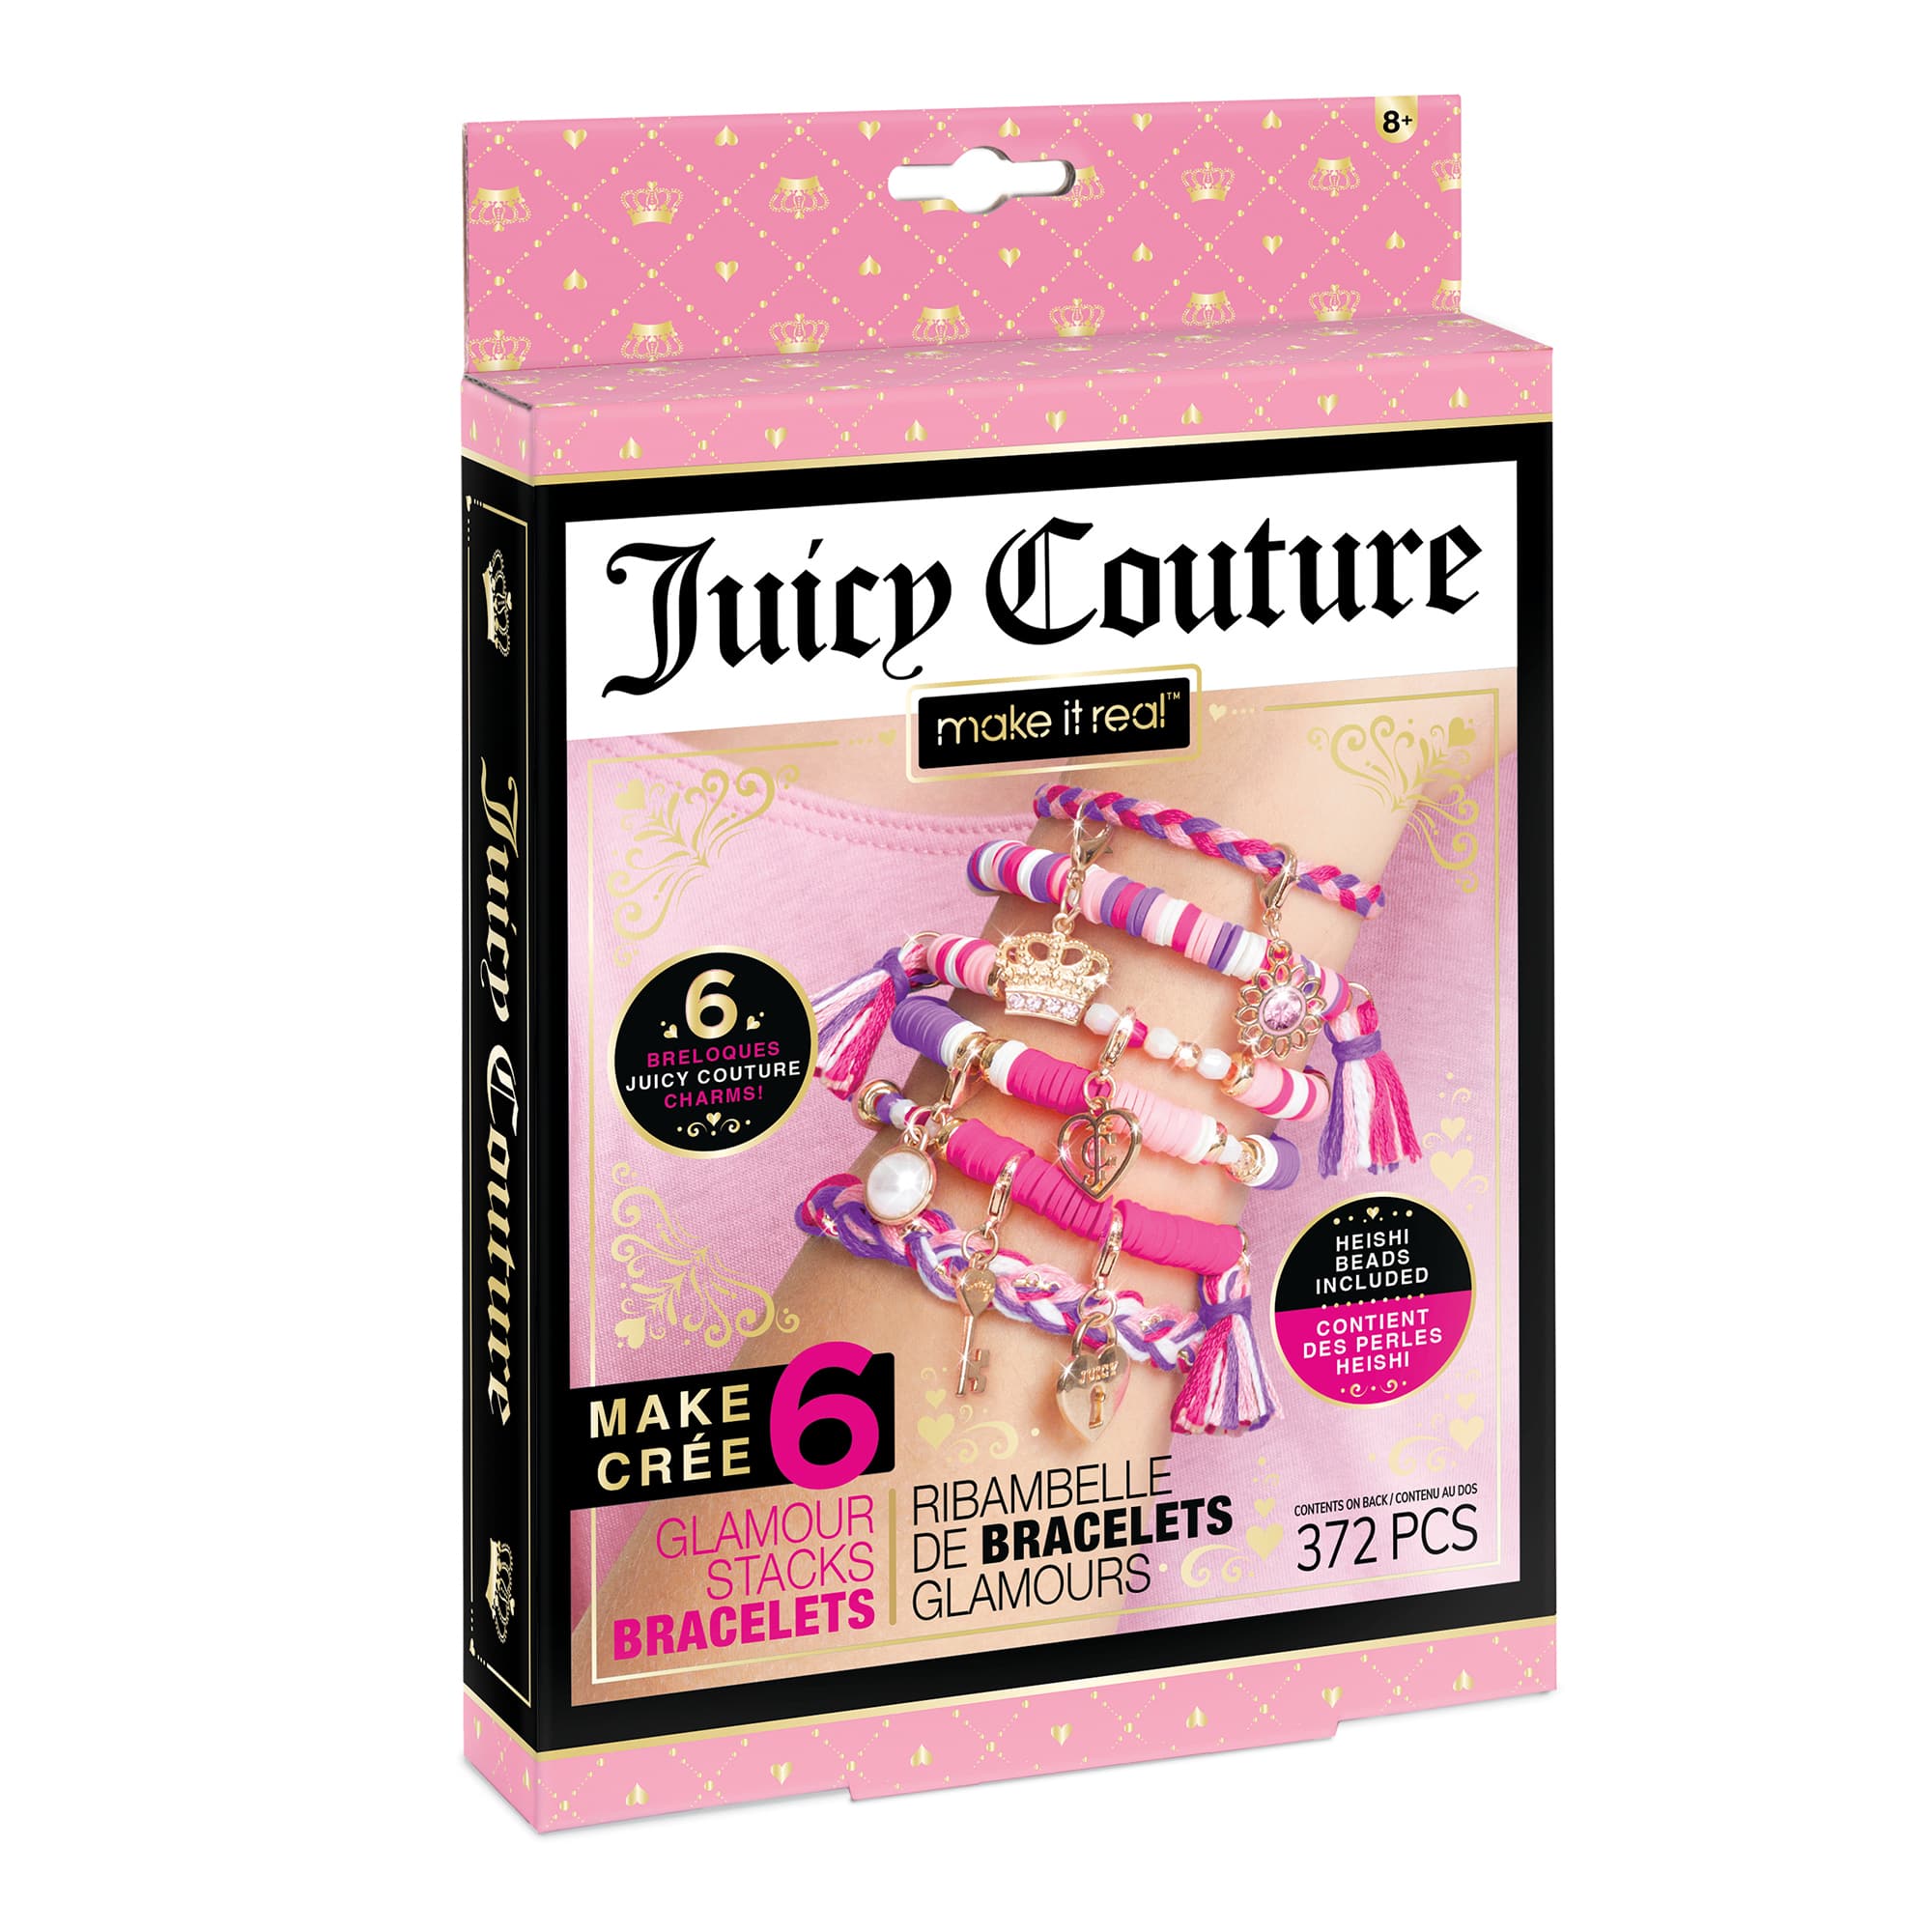 Juicy Couture Fashion Pendant High End Jewelry & Accessories For